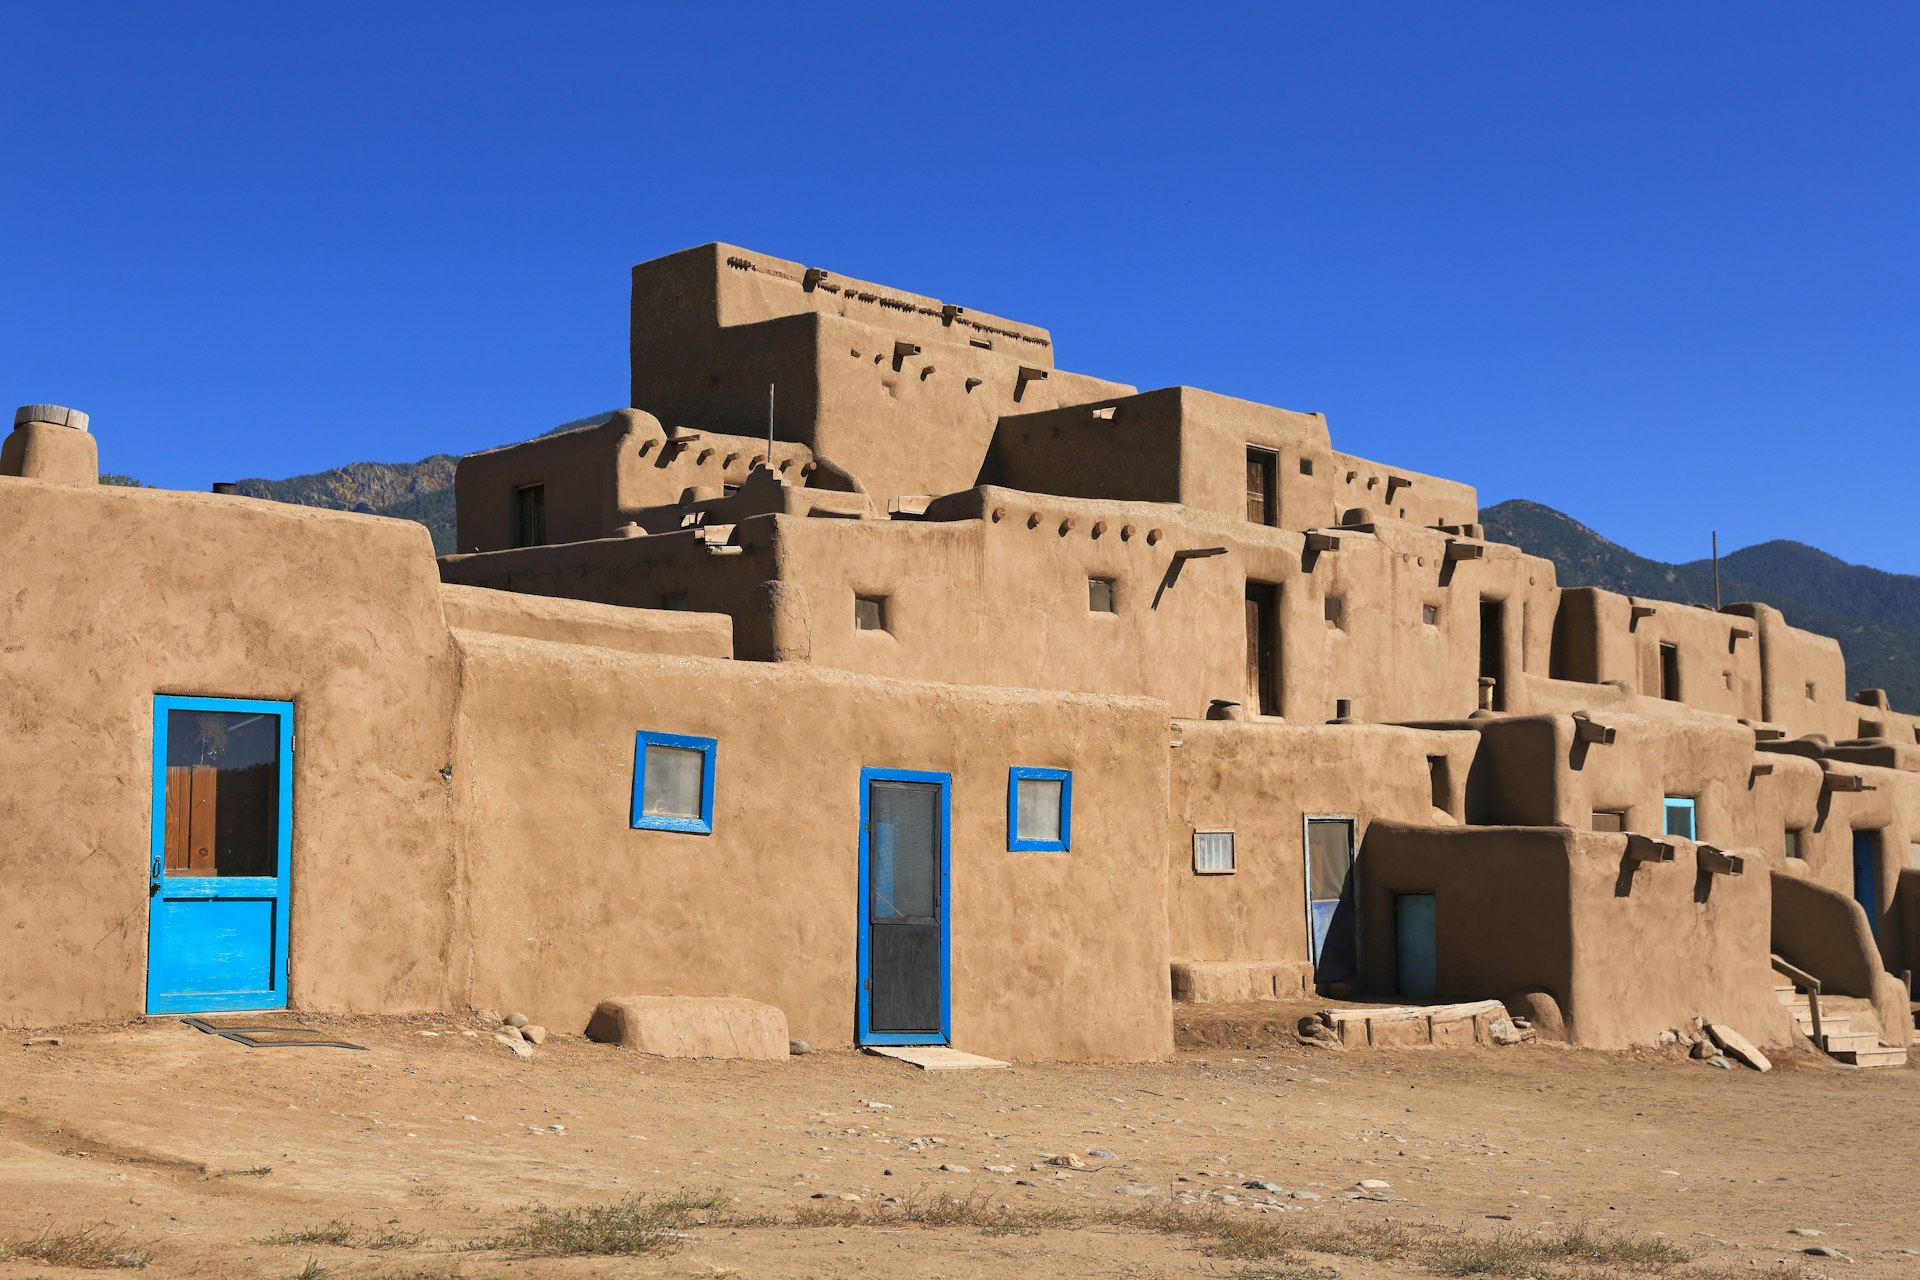 The Taos Pueblo in New Mexico with adobe structures stacked atop each other